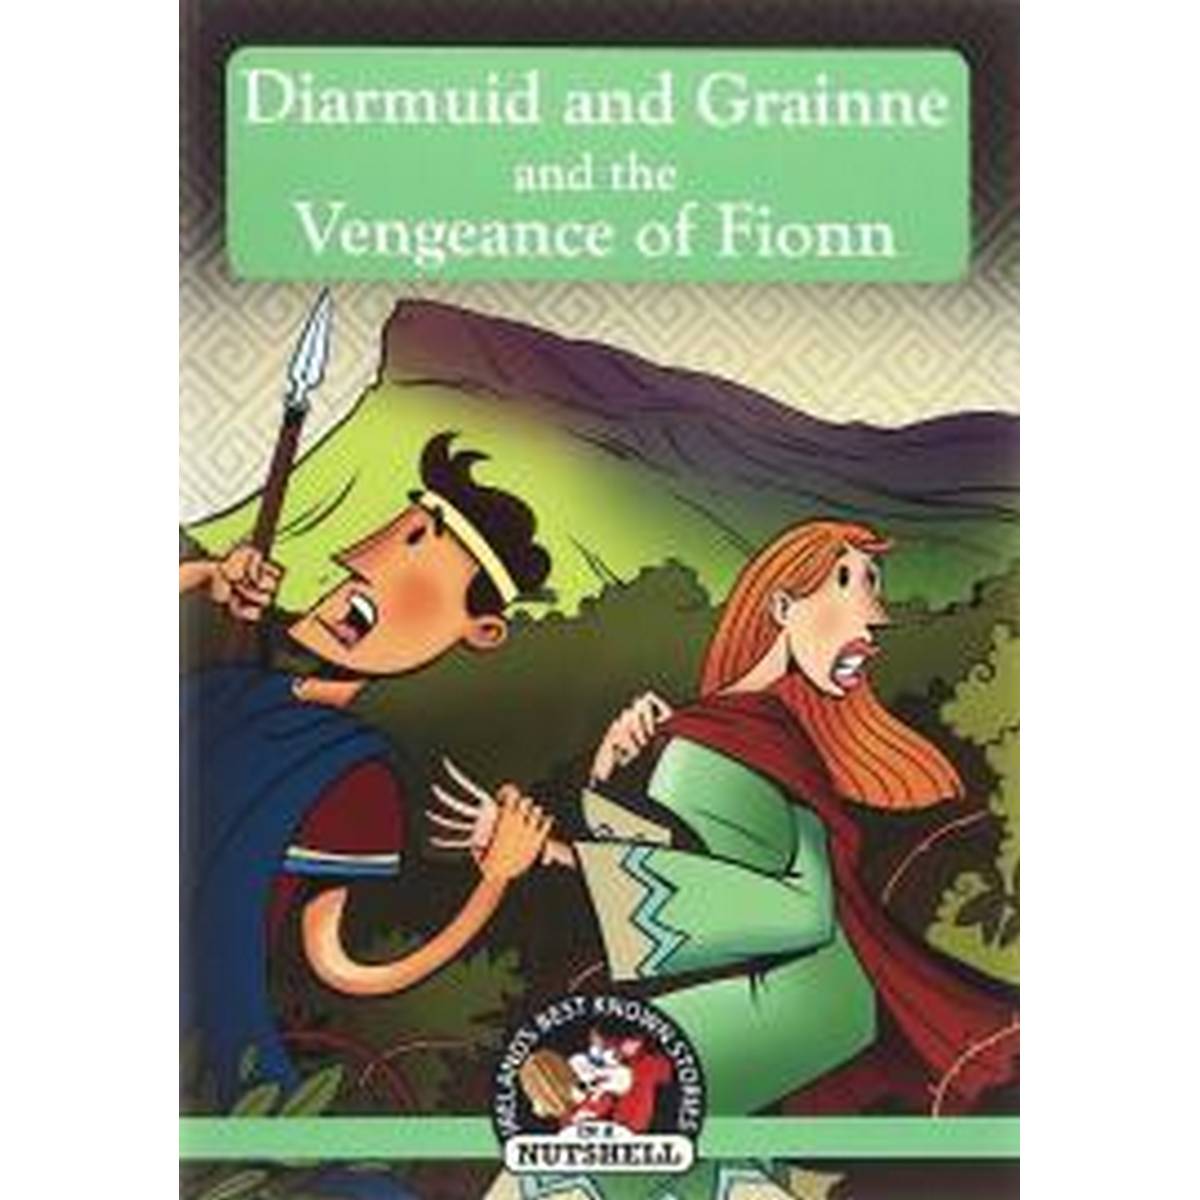 Diarmuid and Grainne and the Vengeance of Fionn (In a Nutshell) 14